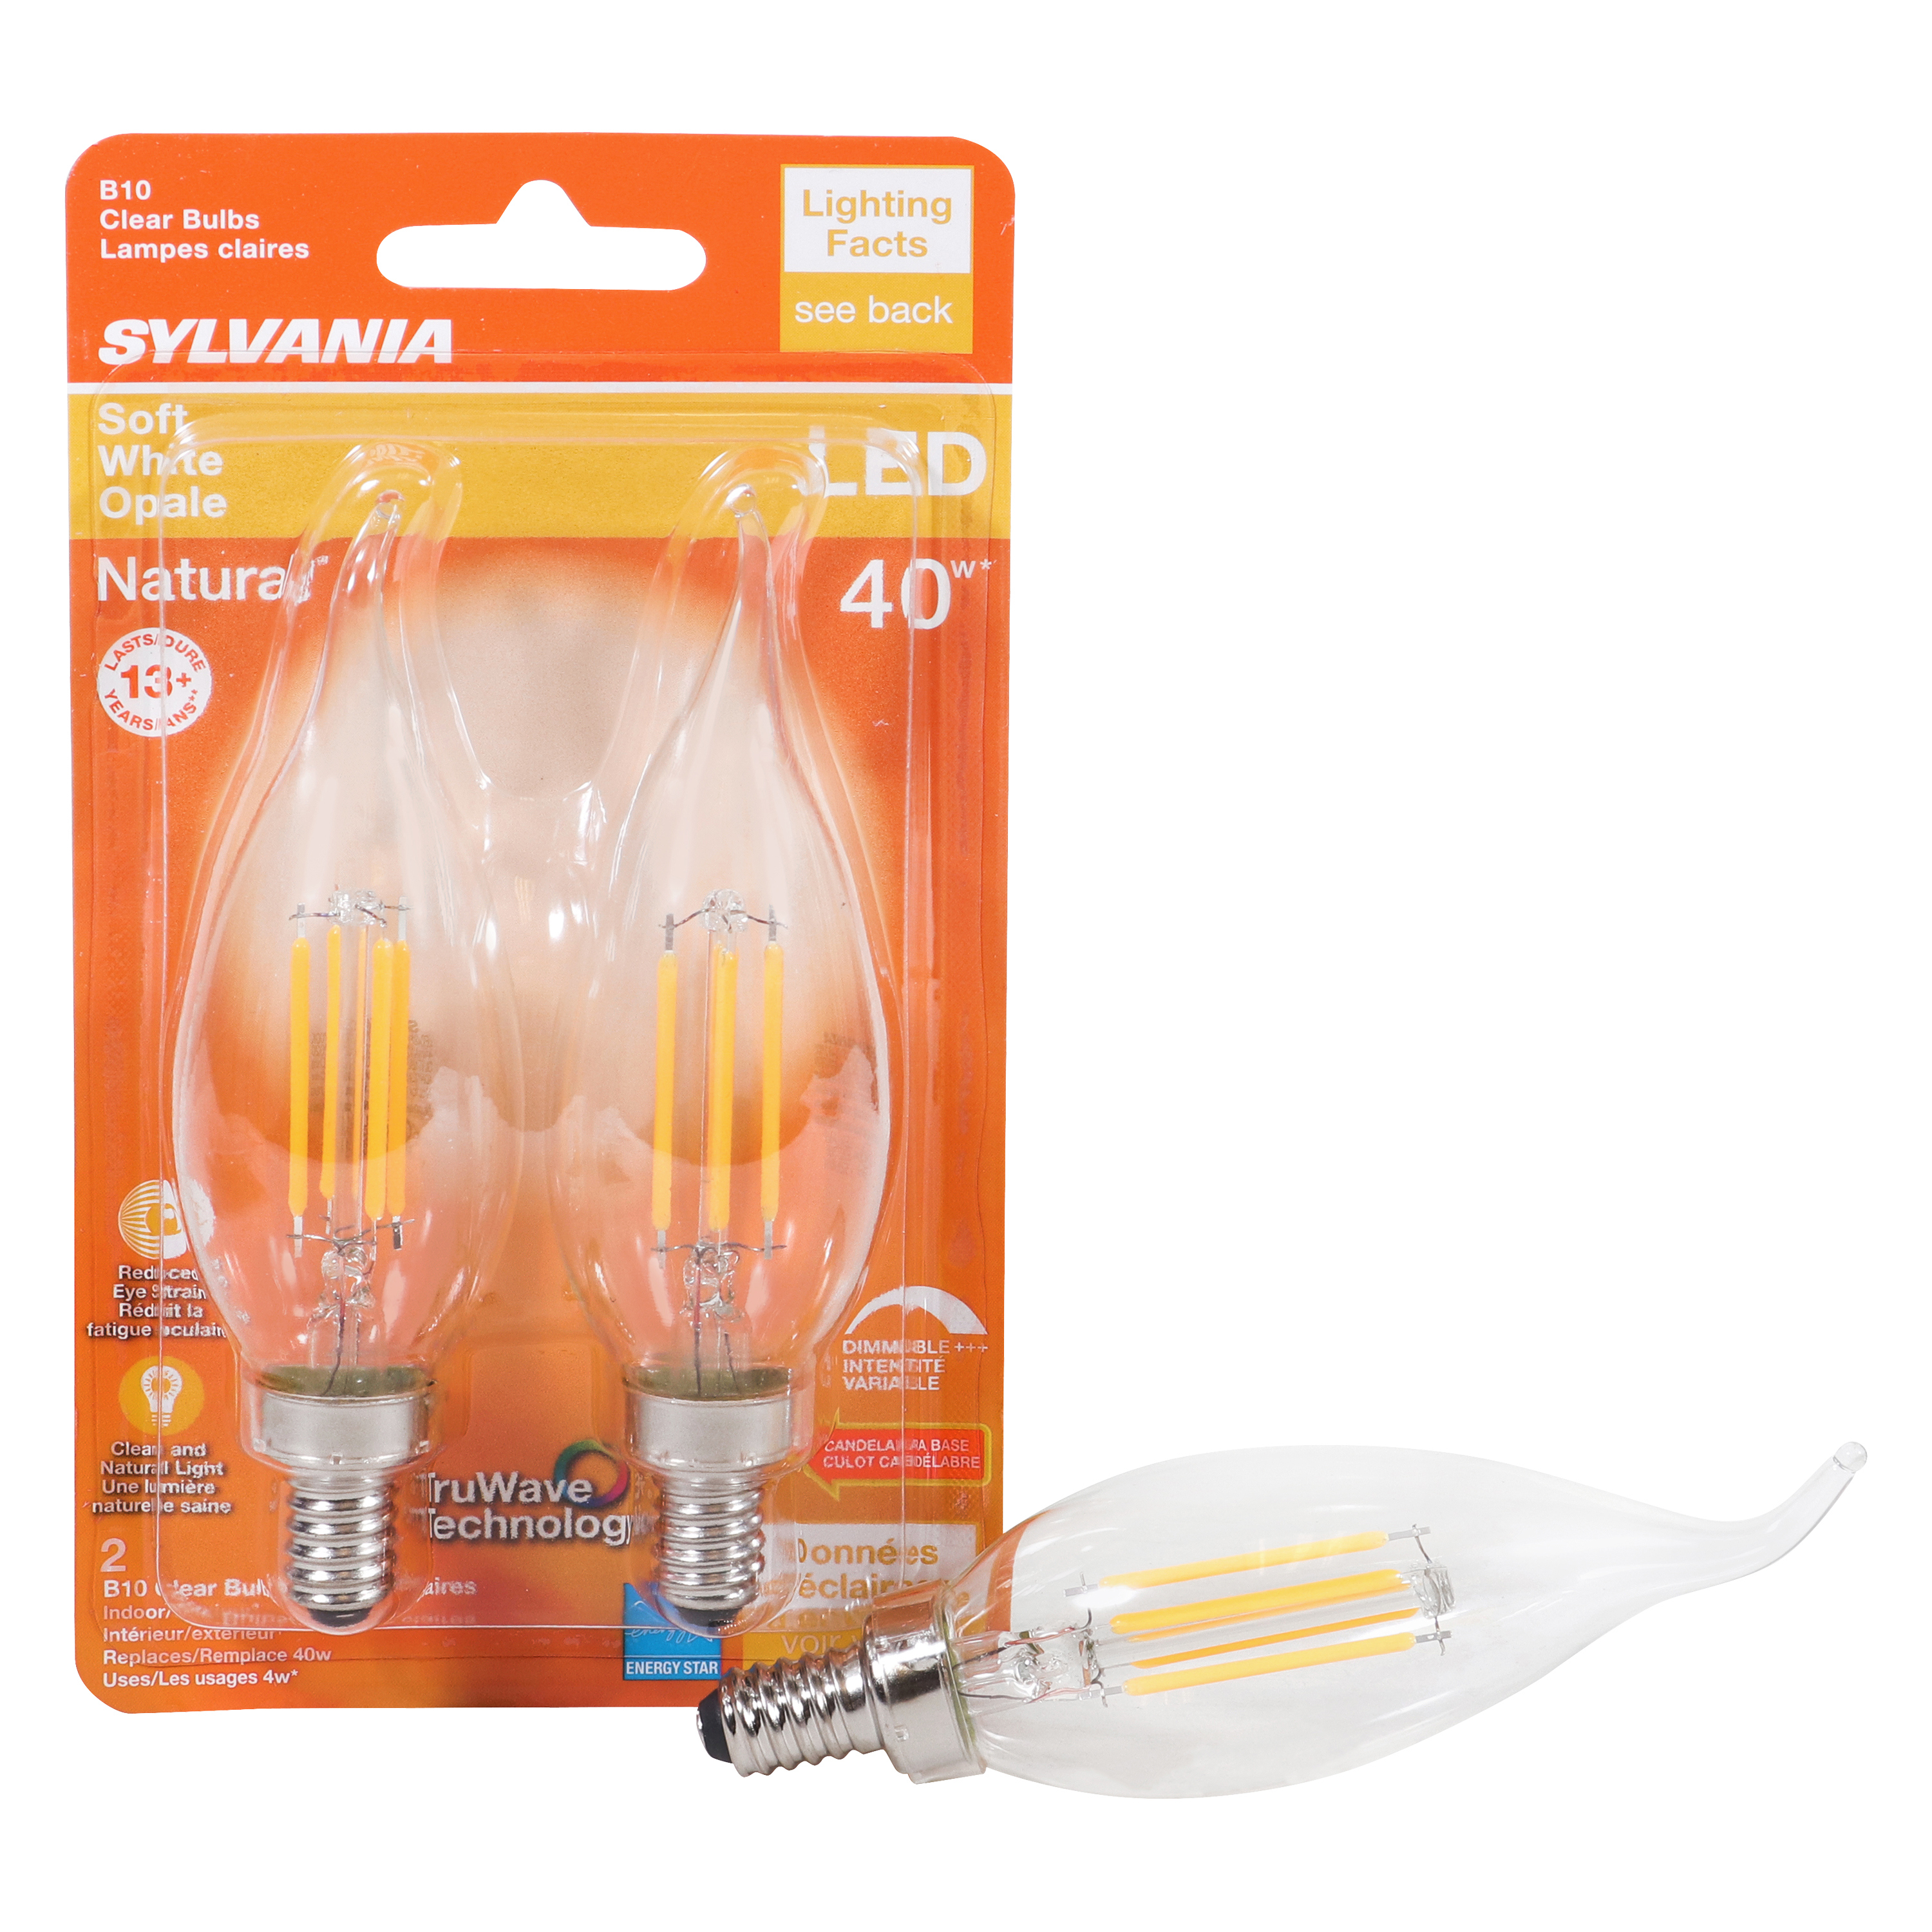 Sylvania 40755 Natural LED Bulb, Decorative, B10 Bent Tip Lamp, 40 W Equivalent, E12 Lamp Base, Dimmable, Clear